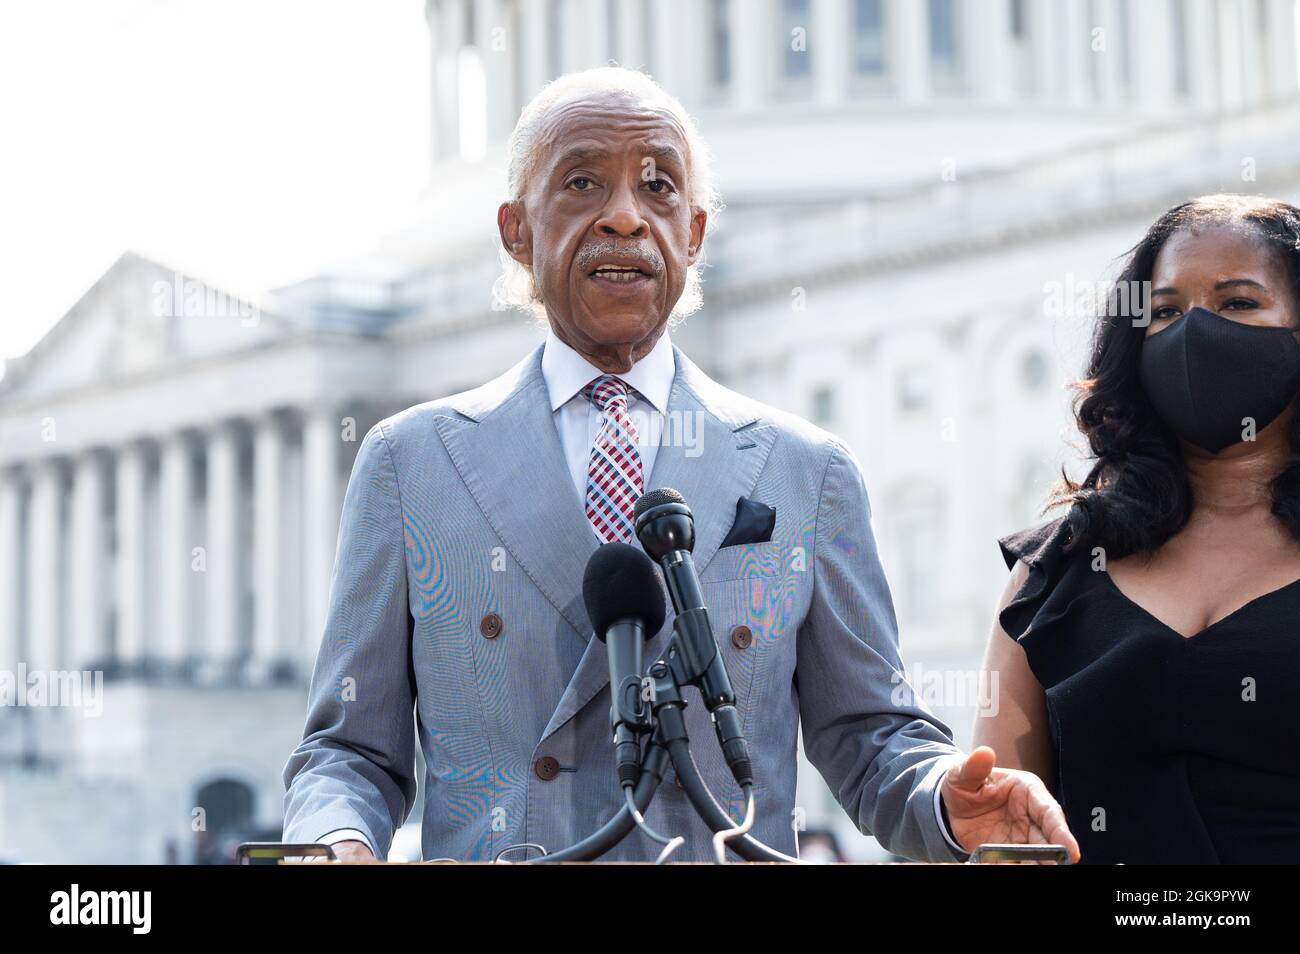 Washington, U.S. 13th Sep, 2021. September 13, 2021 - Washington, DC, United States: Rev. Al Sharpton speaking at the Capitol about voting rights protection laws. (Photo by Michael Brochstein/Sipa USA) Credit: Sipa USA/Alamy Live News Stock Photo